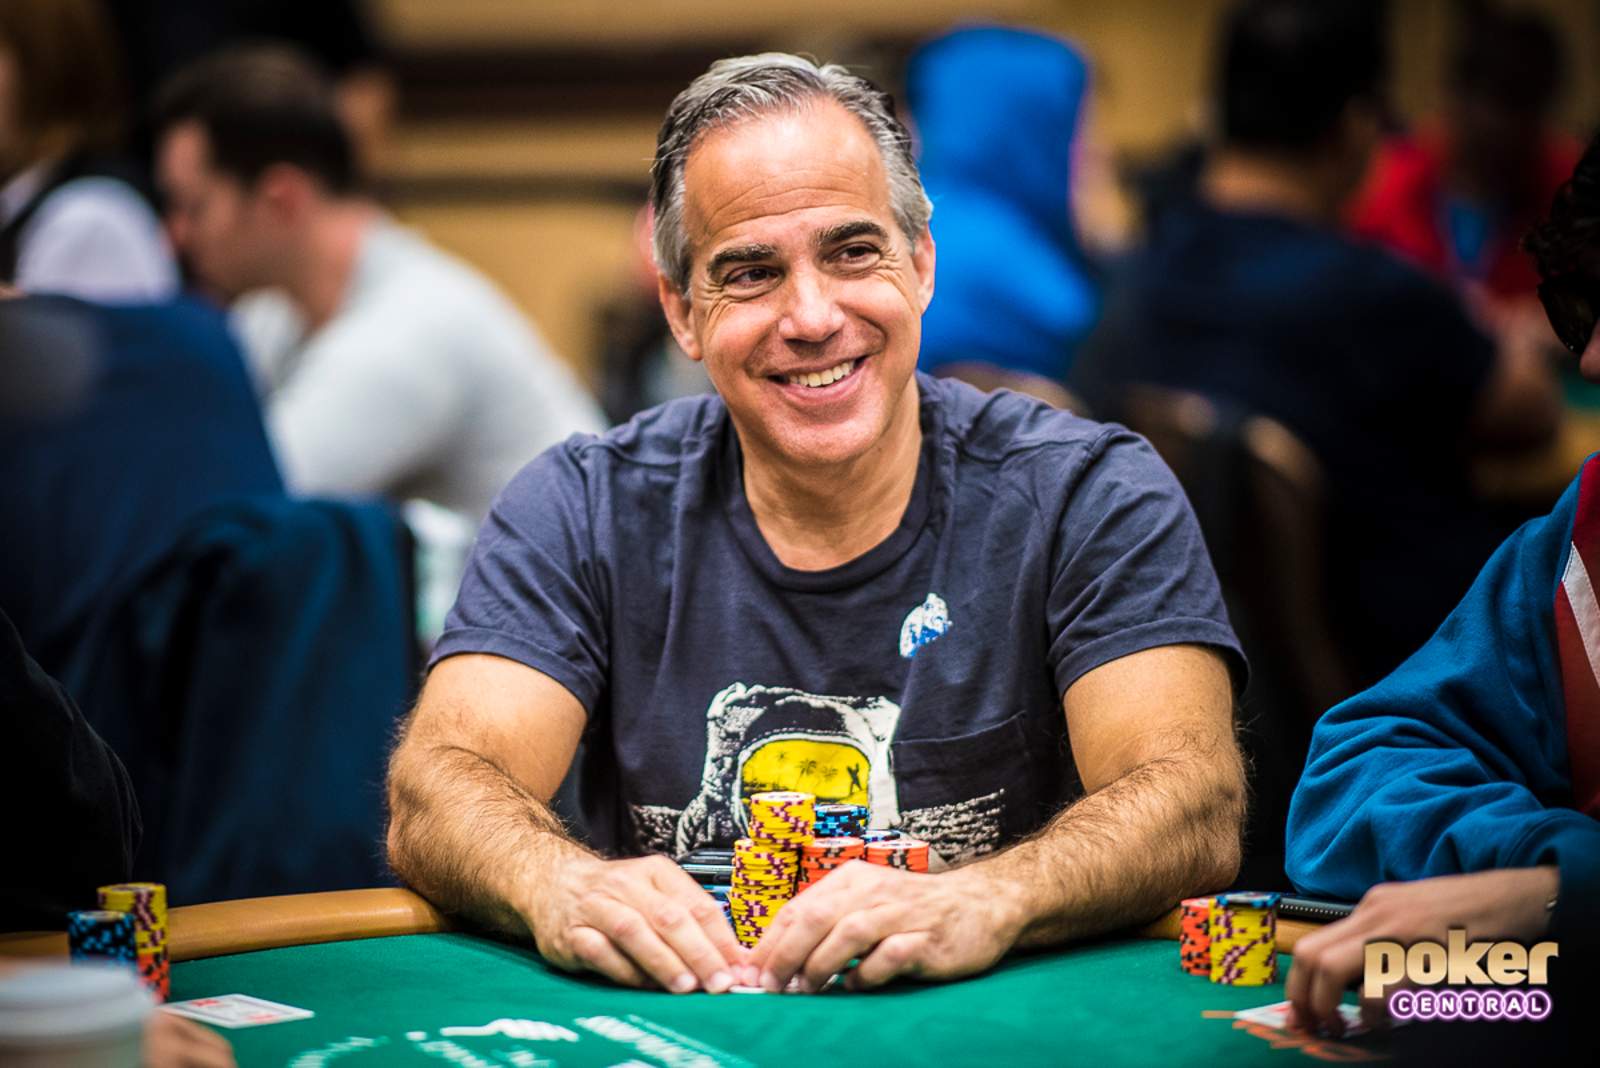 Deep in the Main Event Again, It’s Still Just Poker For Cliff Josephy